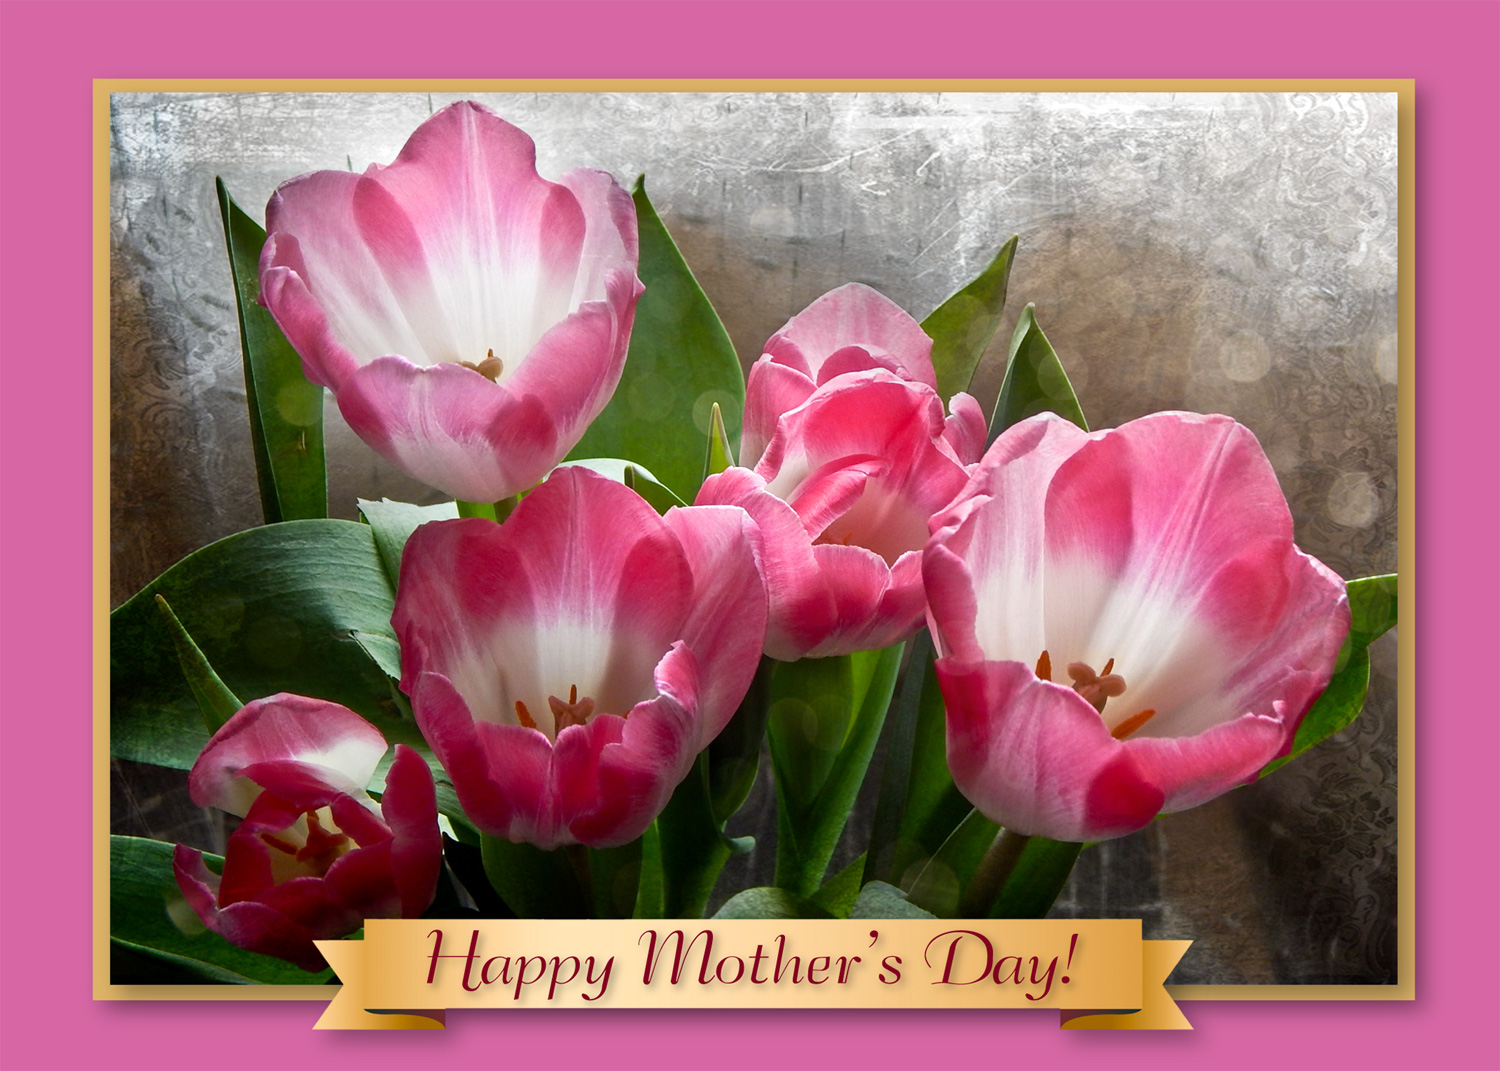 LM-7020-Happy-Mothers-Day-Card-Pink-Tulips – Art Photo Web Studio